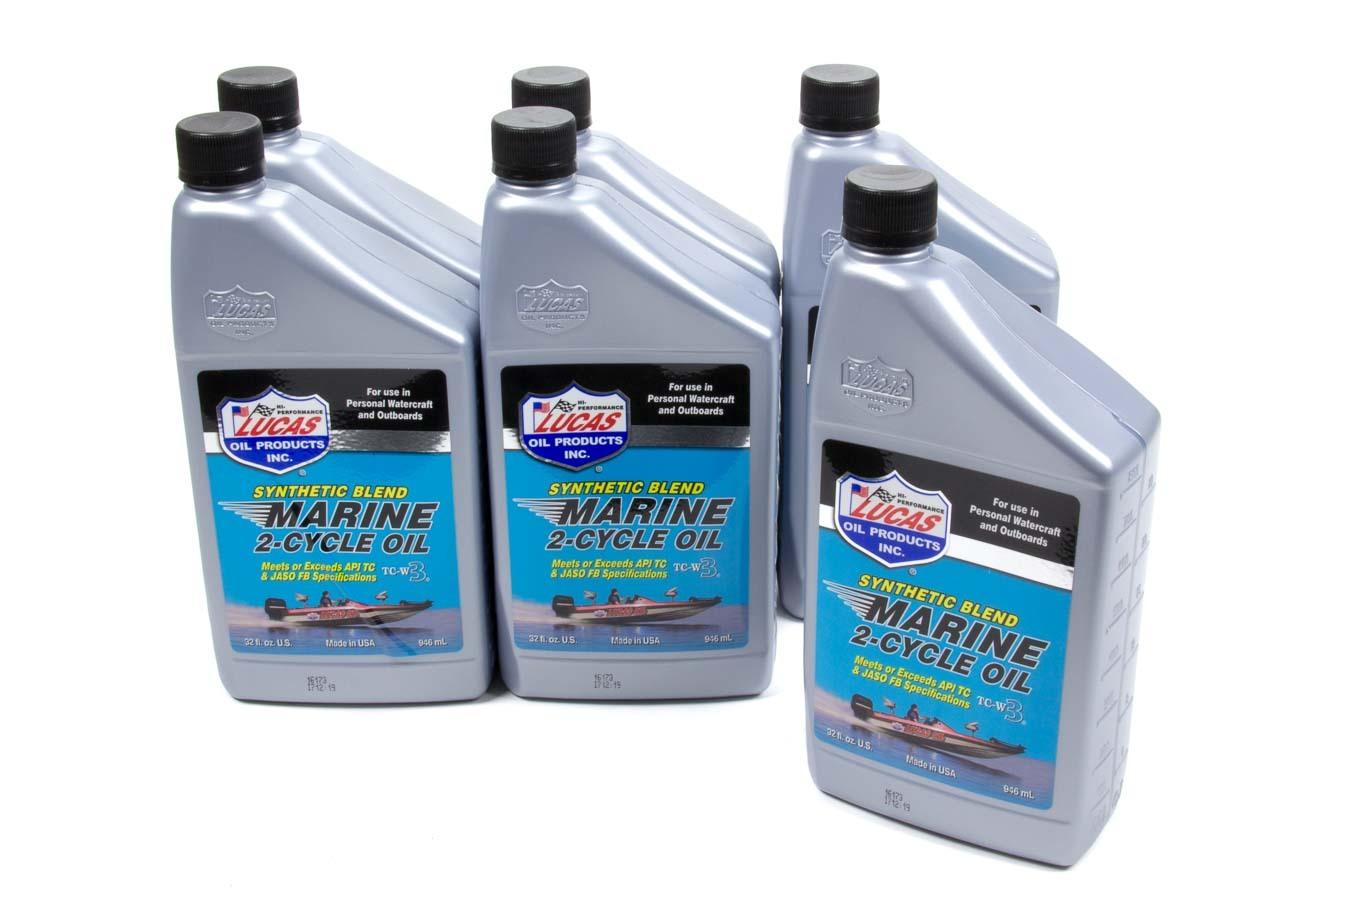 Marine Oil 2 Cycle Case 6 x 1 Qt. Synthetic Blen - Burlile Performance Products